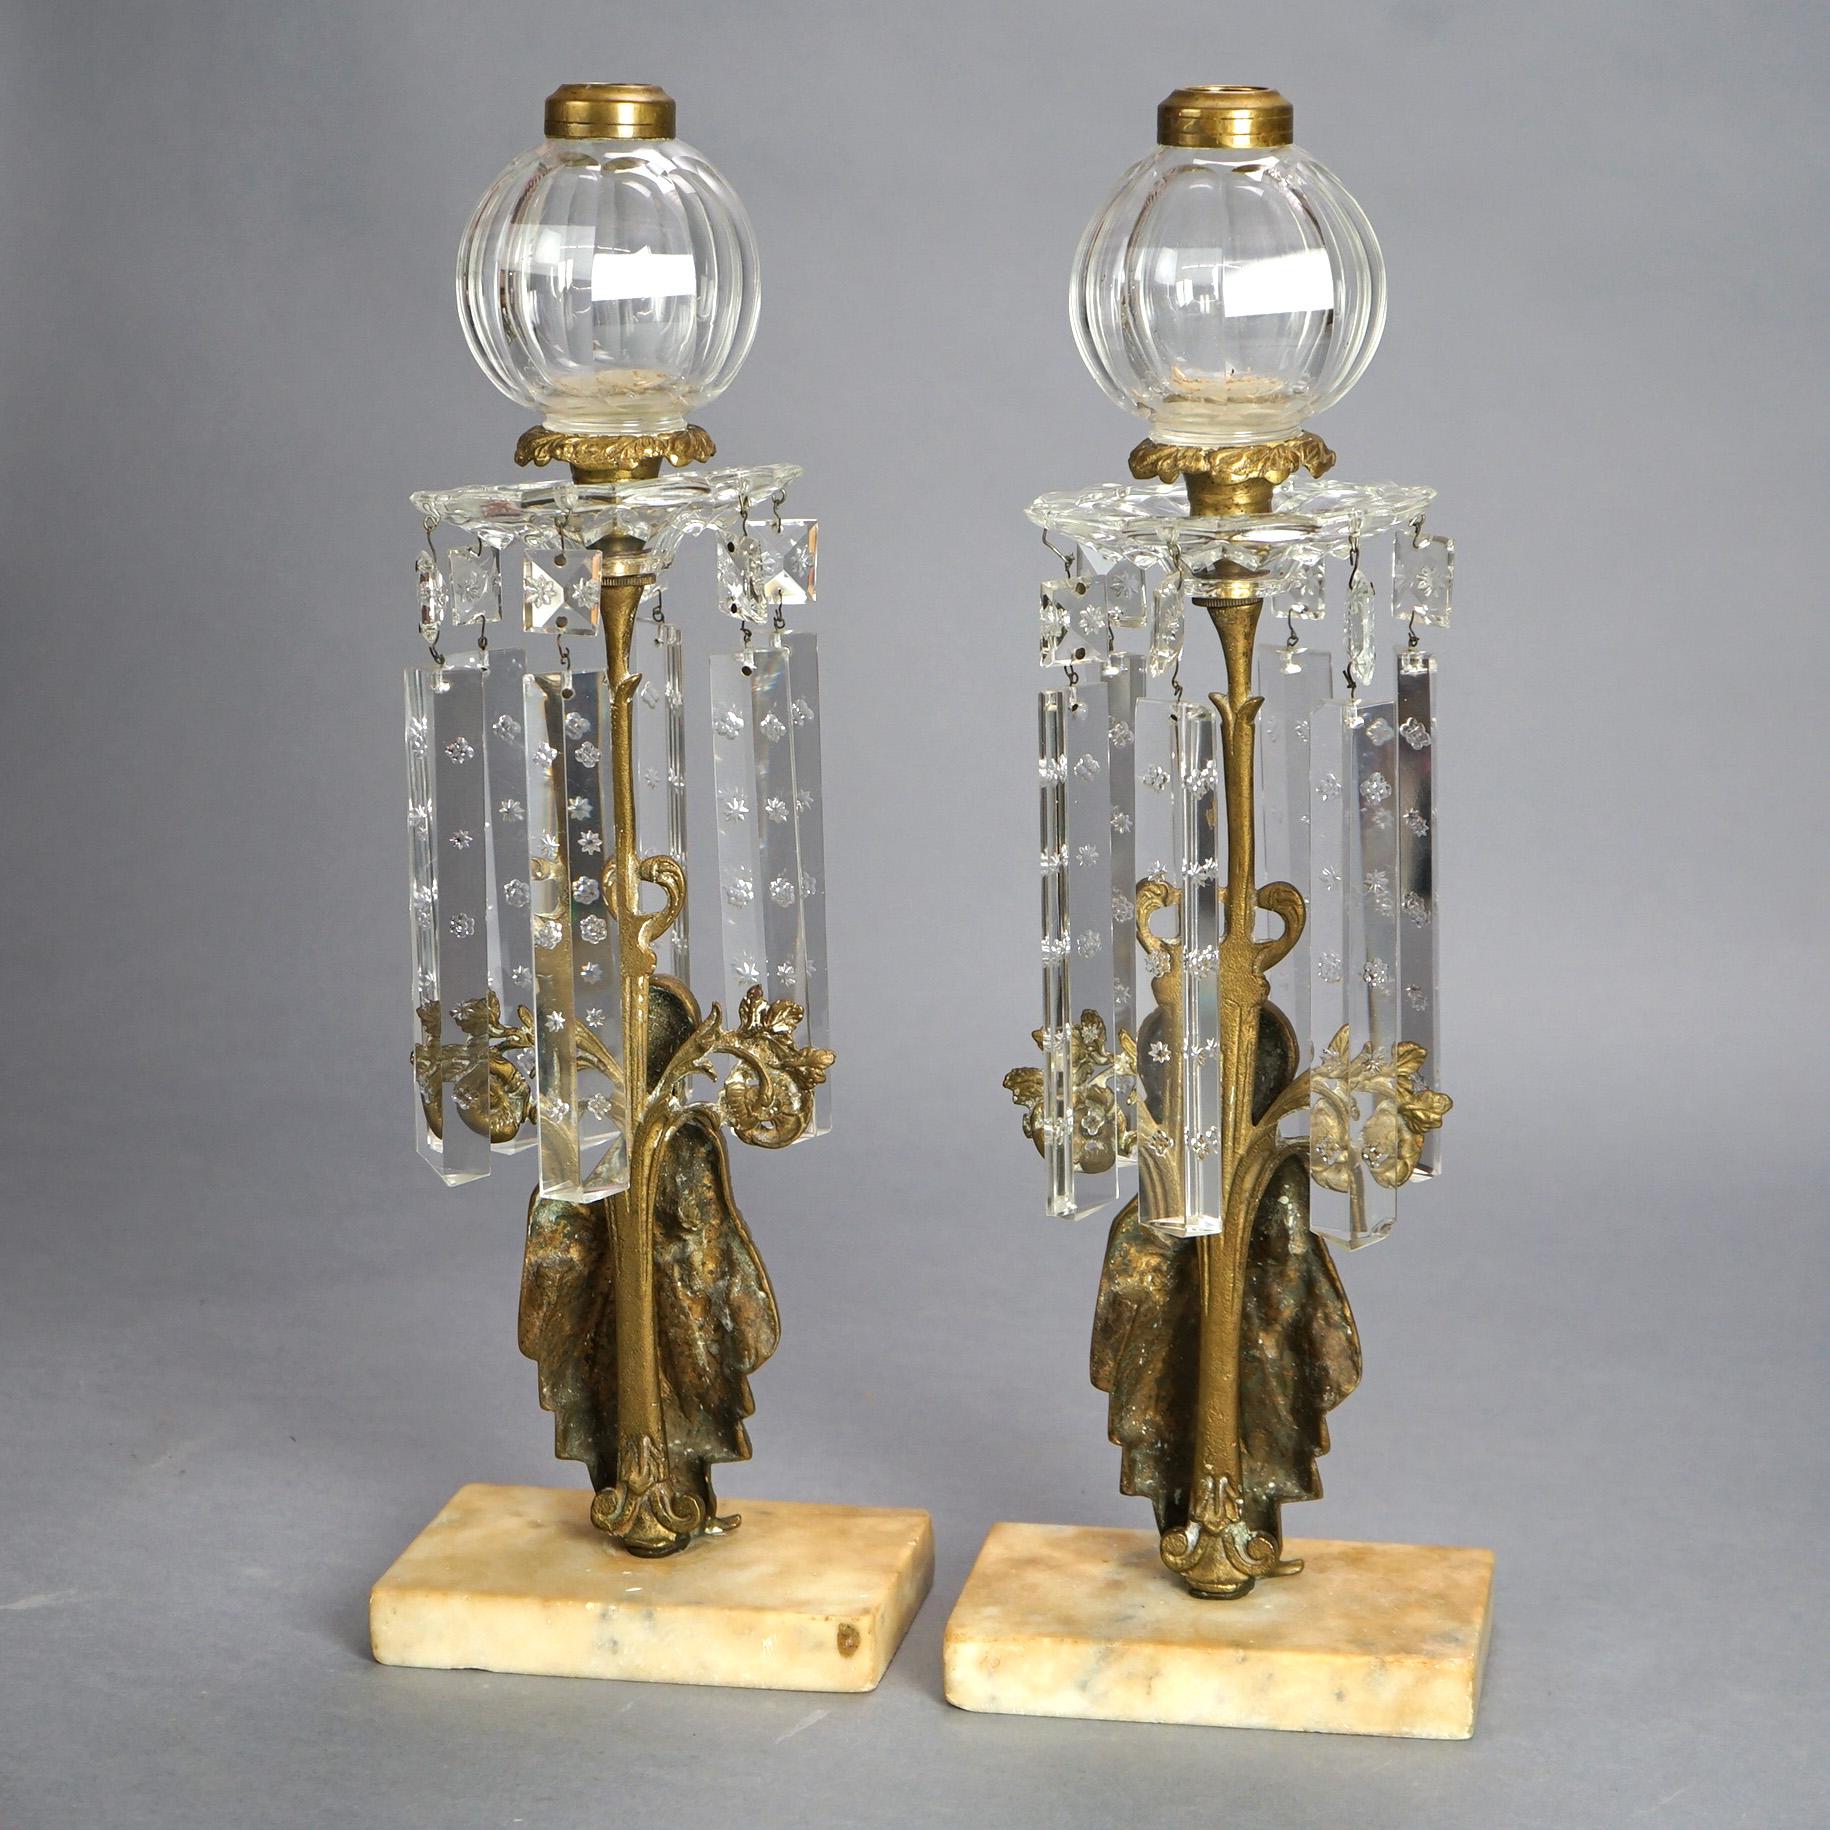 Antique Pair Figural Girandole Sultana Design Oil Lamps with Crystals C1880 For Sale 3